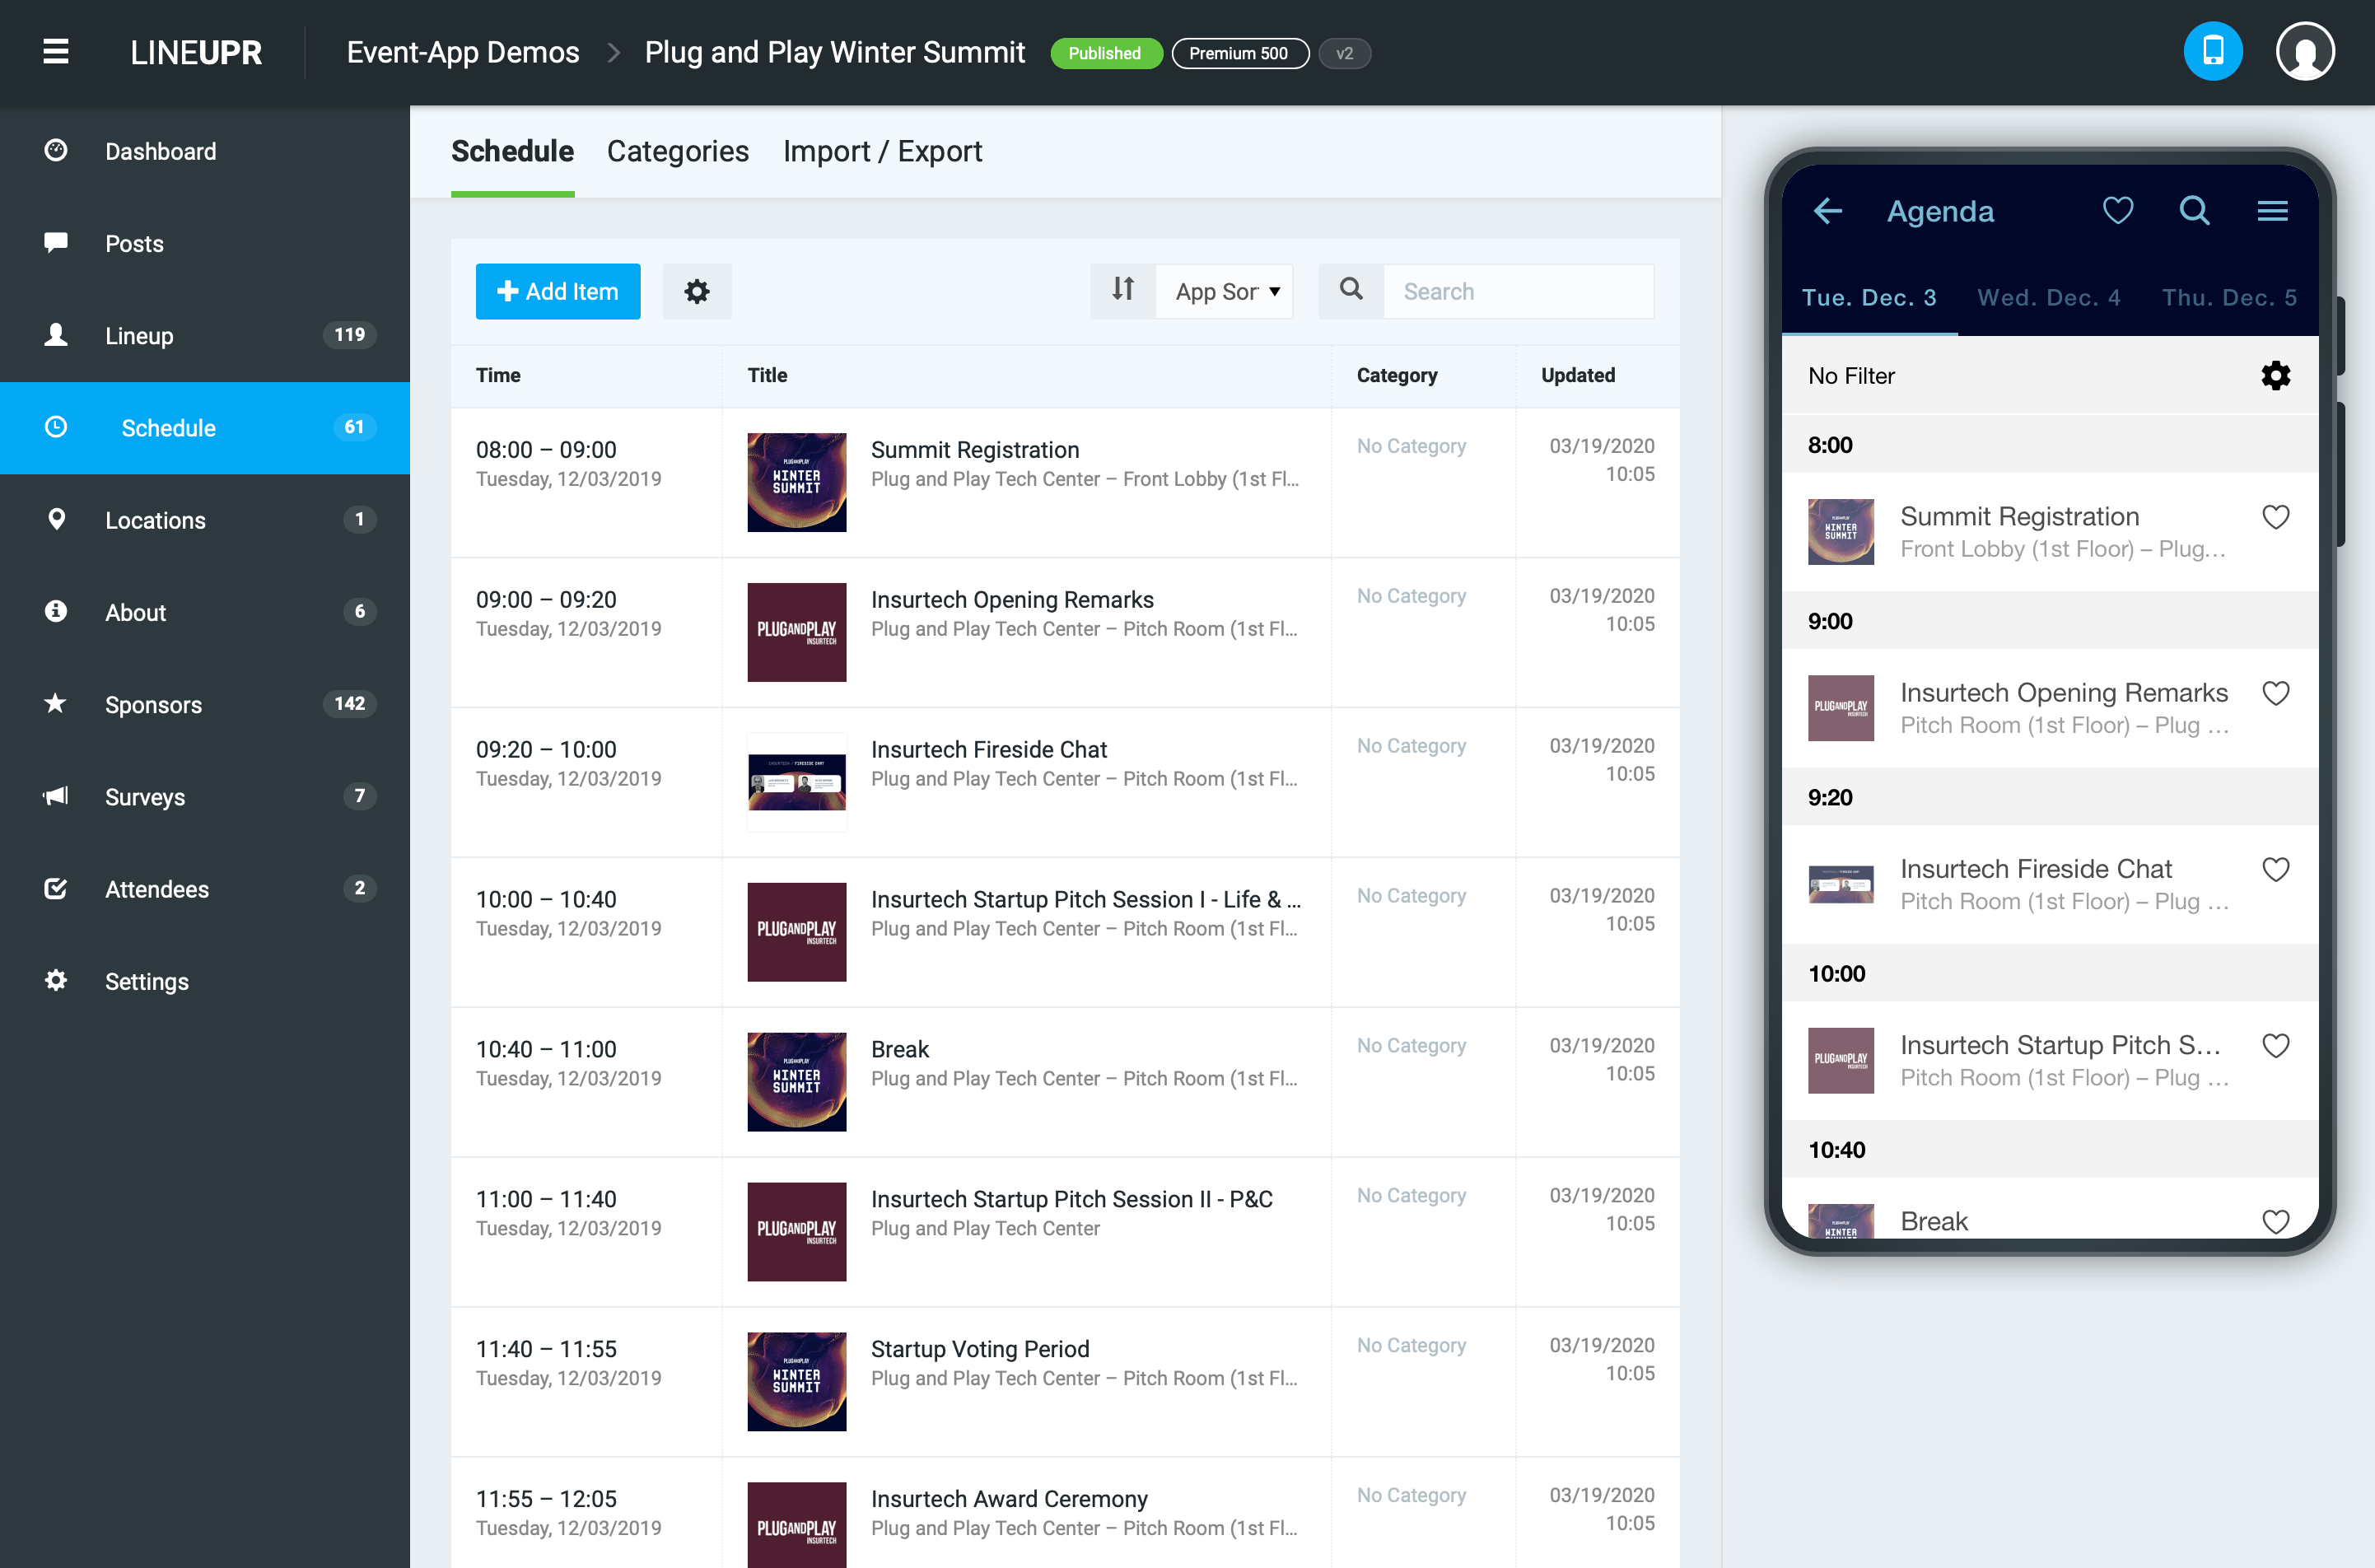 The LineUpr manager to handle and edit your event app